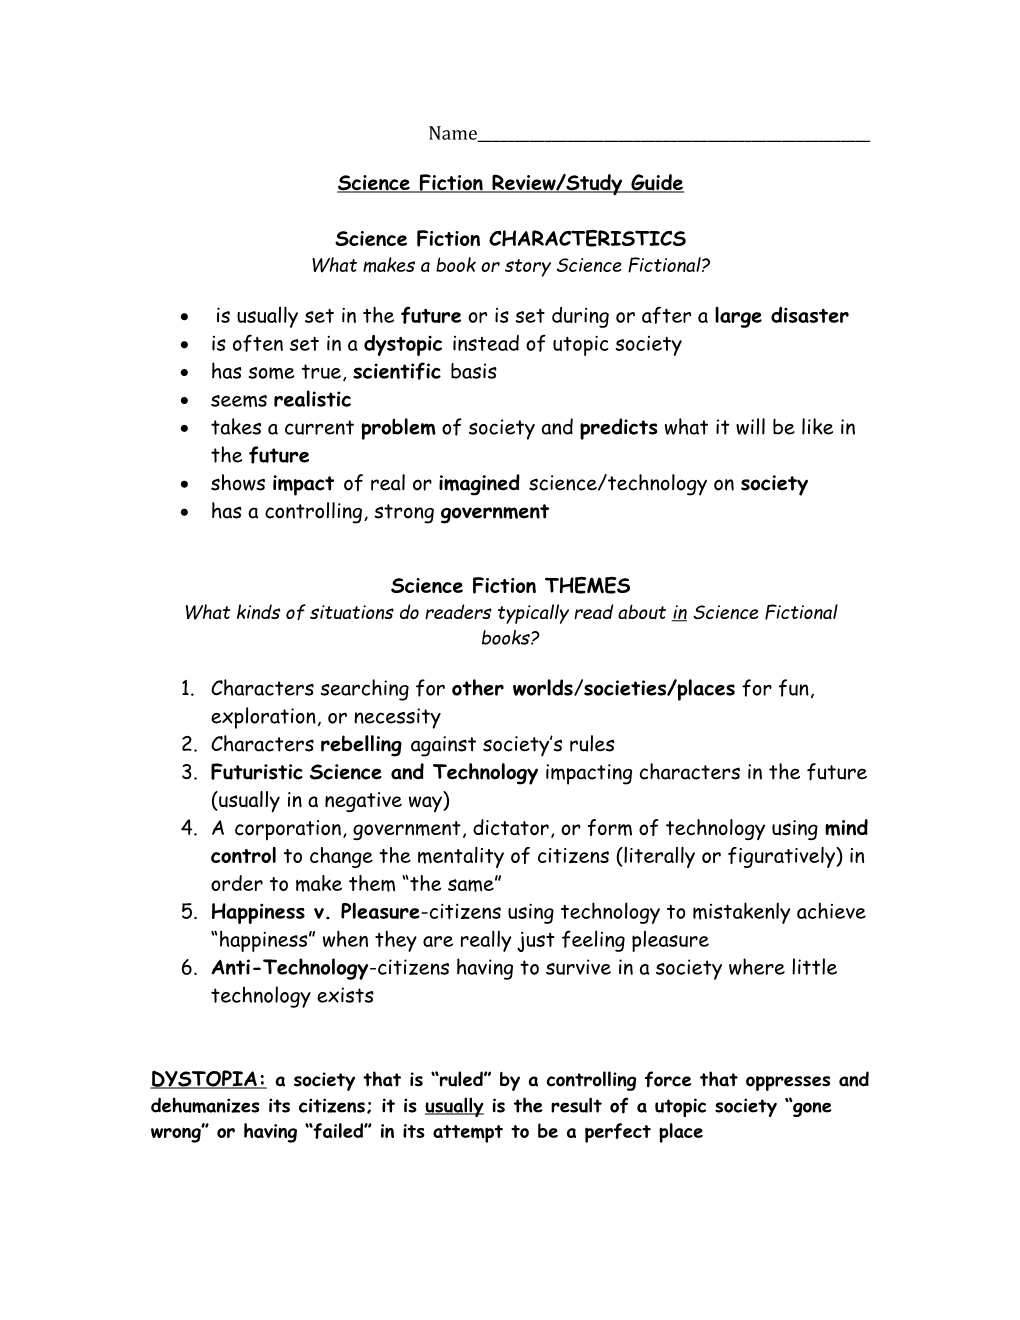 Science Fiction Review/Study Guide